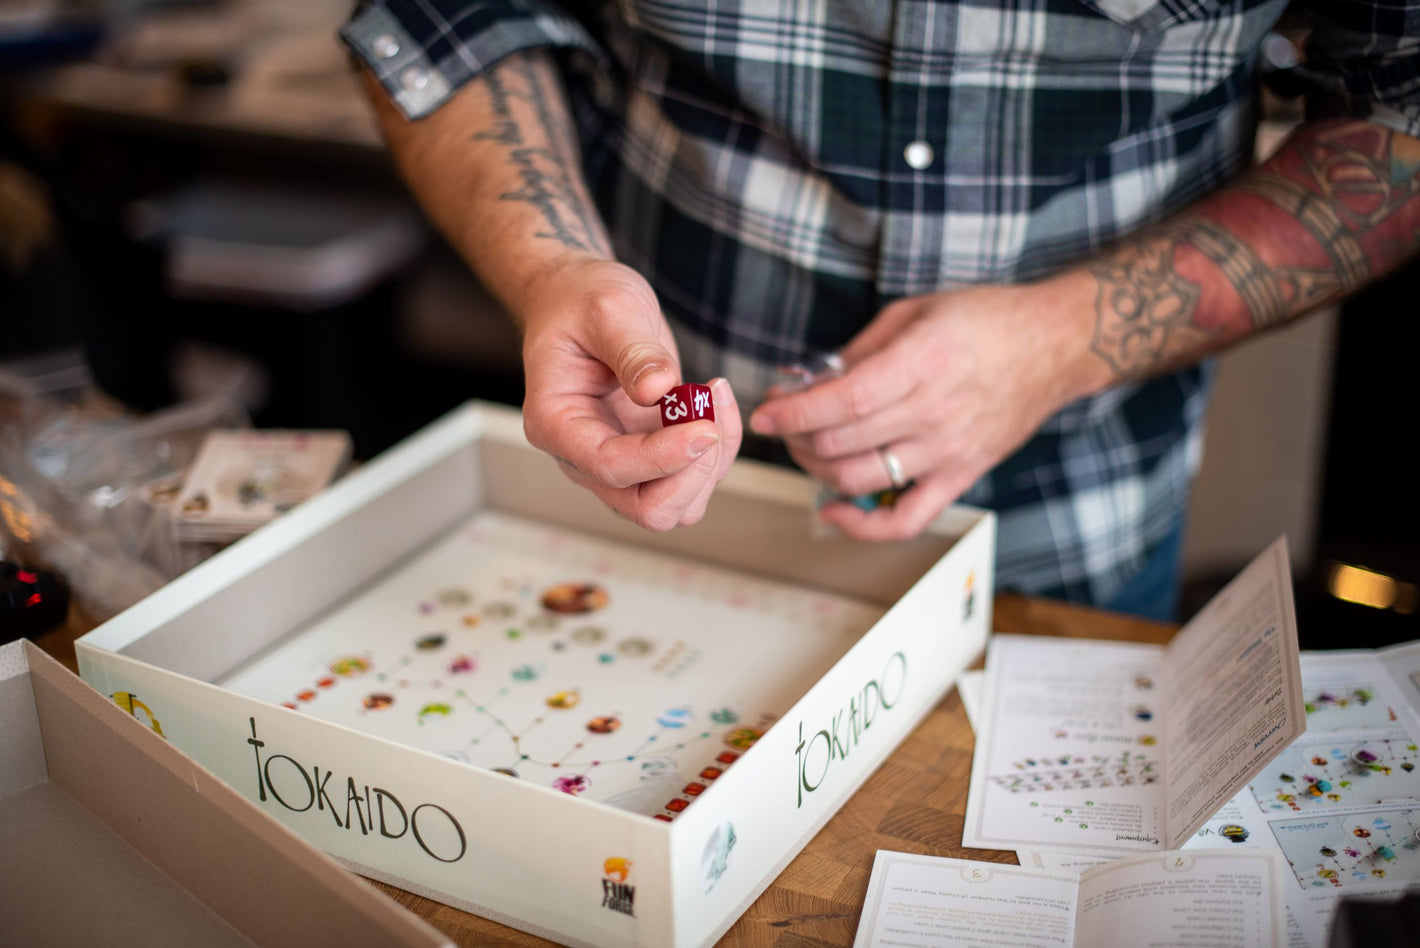 Image shows an employee holding a die while counting the pieces in the Tokaido board game. Instruction manuals and components are also laid out on a table.